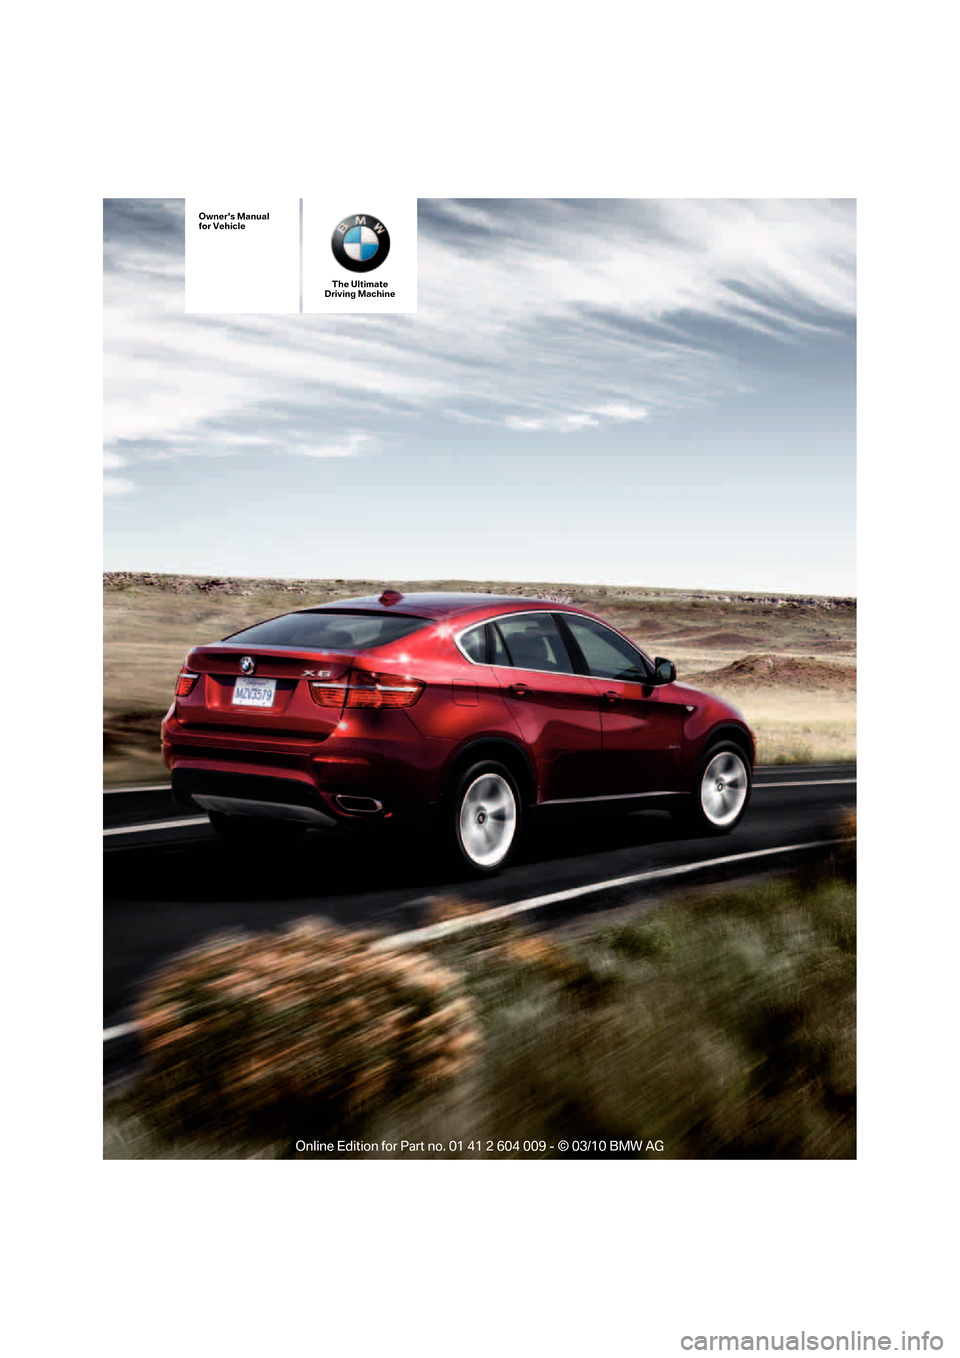 BMW X6 2012 E71 Owners Manual The Ultimate
Driving Machine
Owners Manual
for Vehicle 